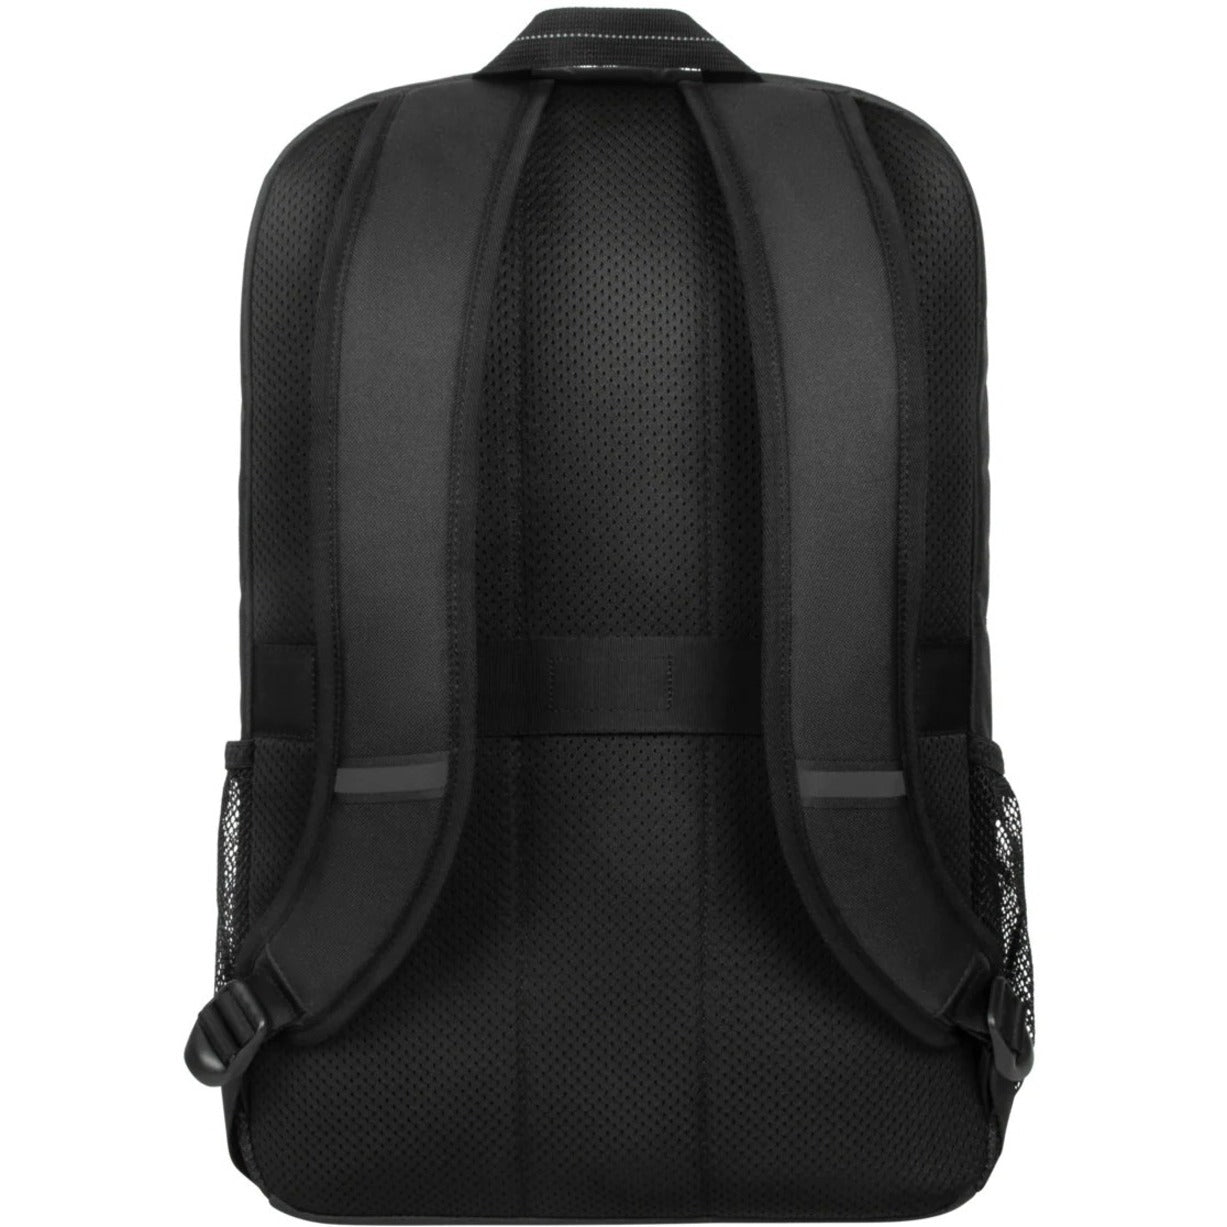 Targus TBB944GL 17.3" Modern Classic Backpack - Black, Carrying Case for Accessories, Smartphone, Notebook